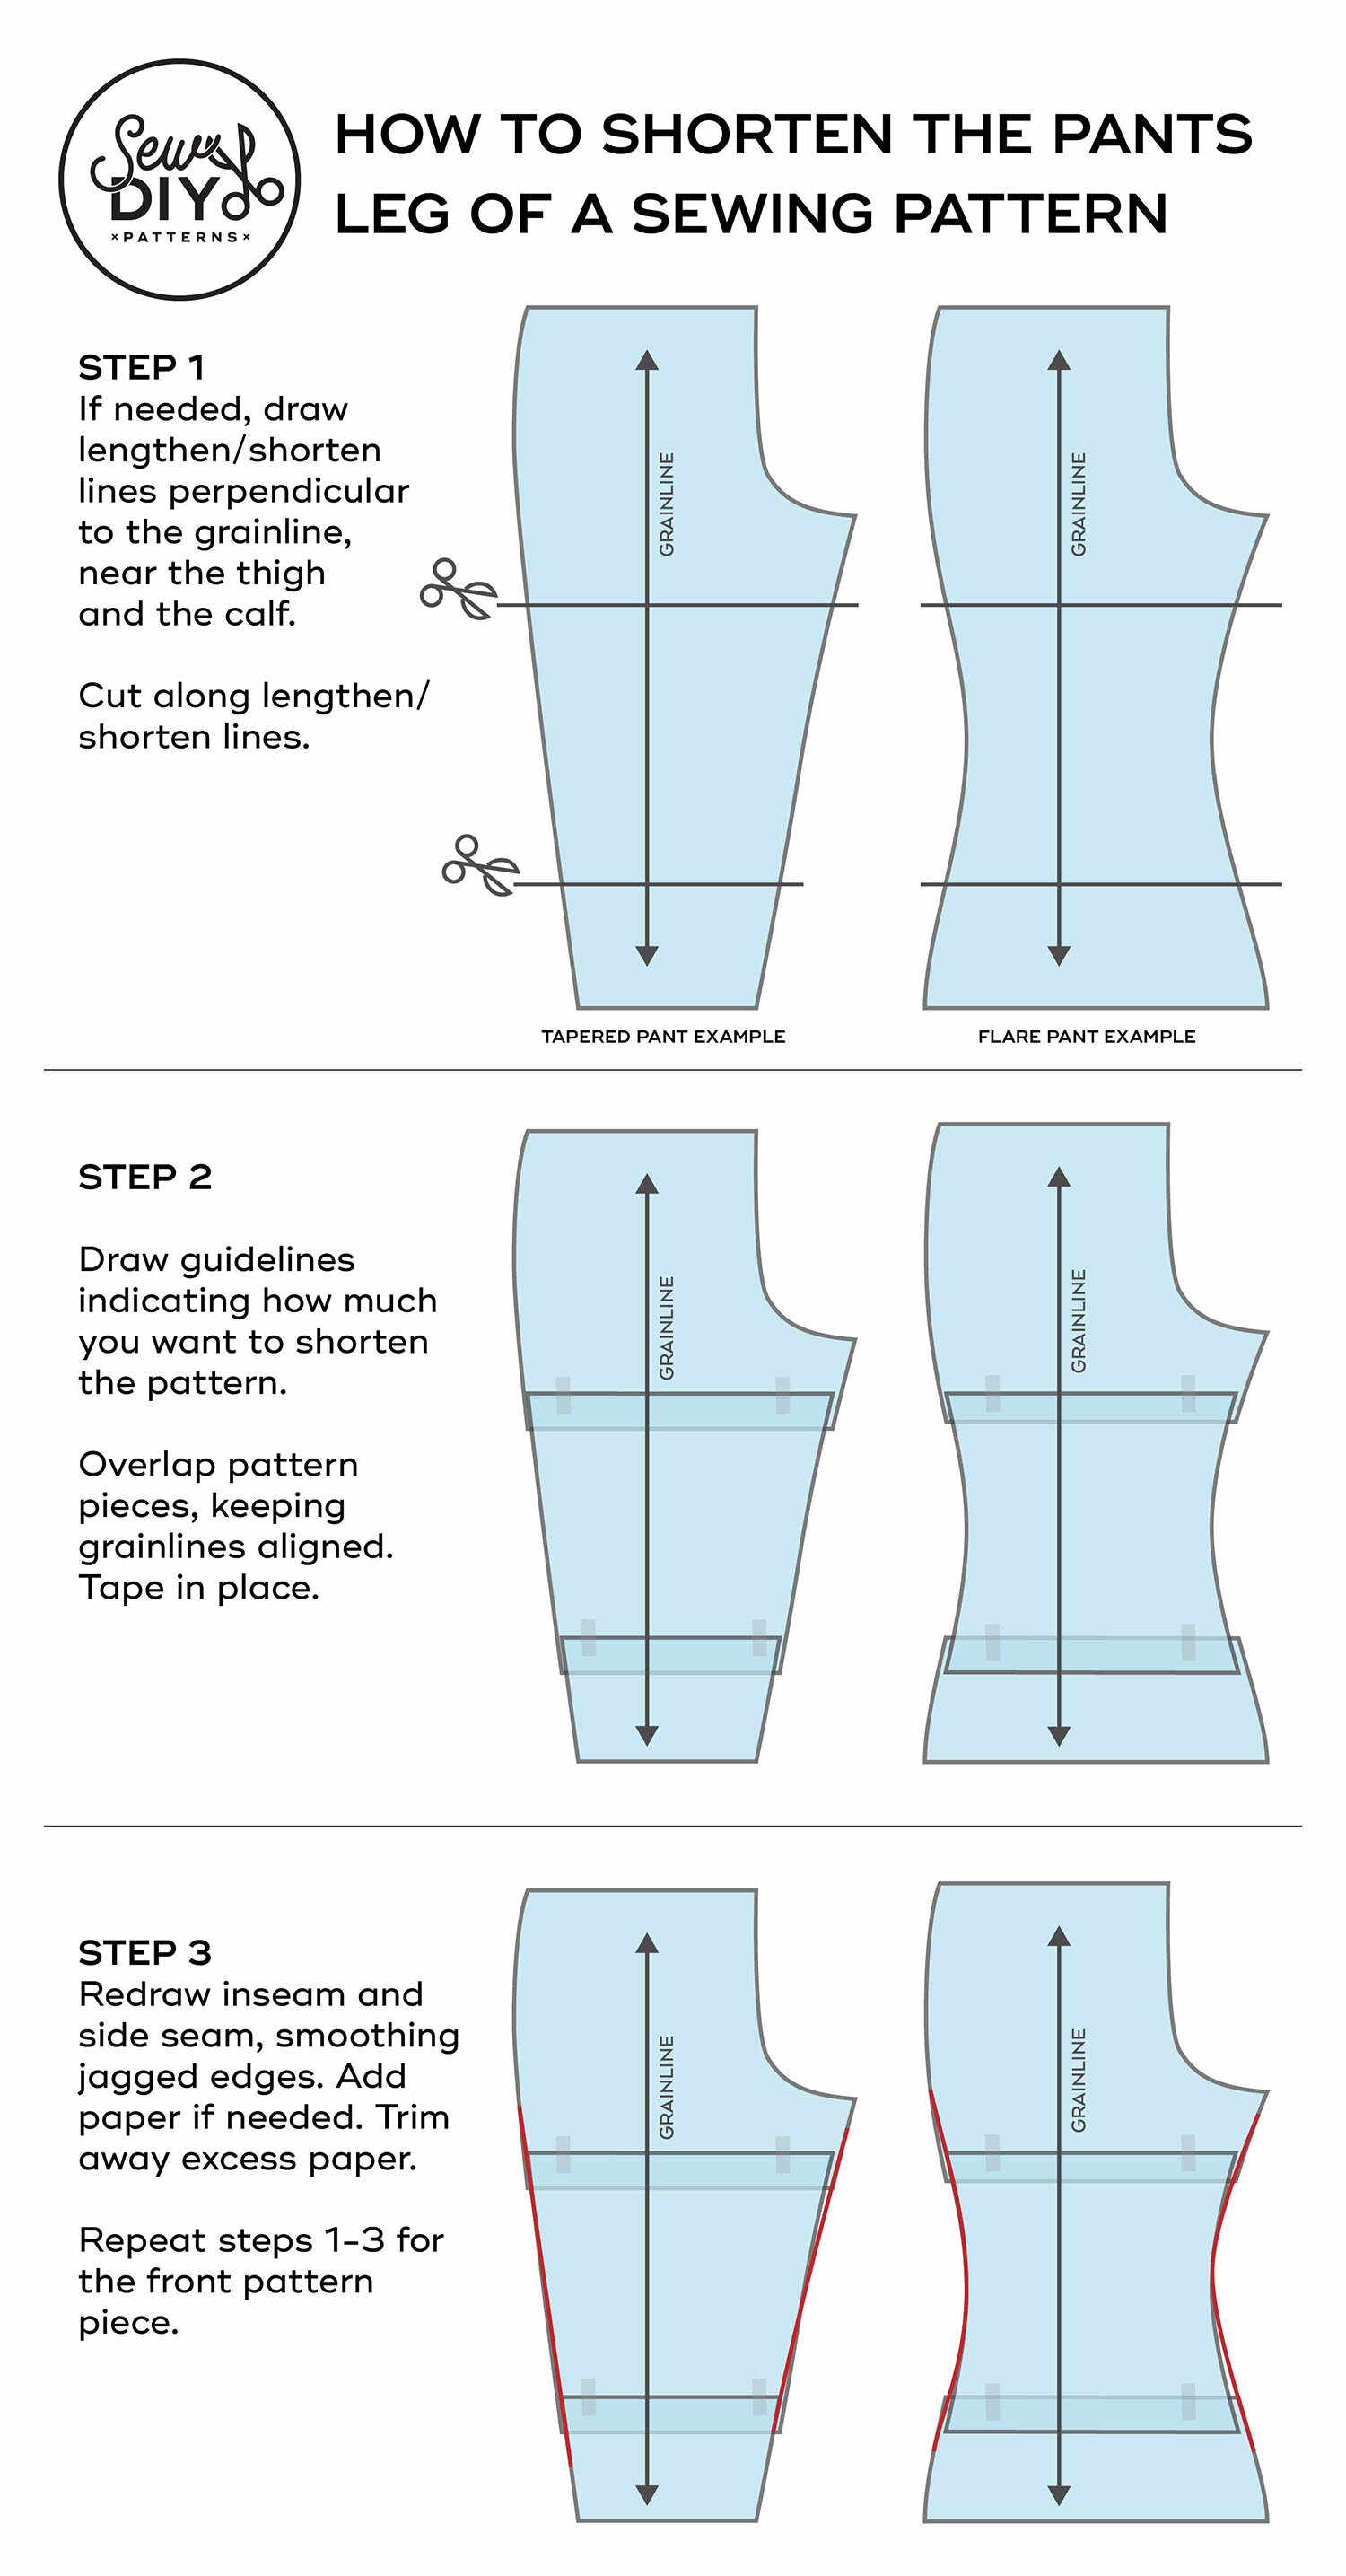 How to shorten or lengthen the legs of a pants pattern - Video